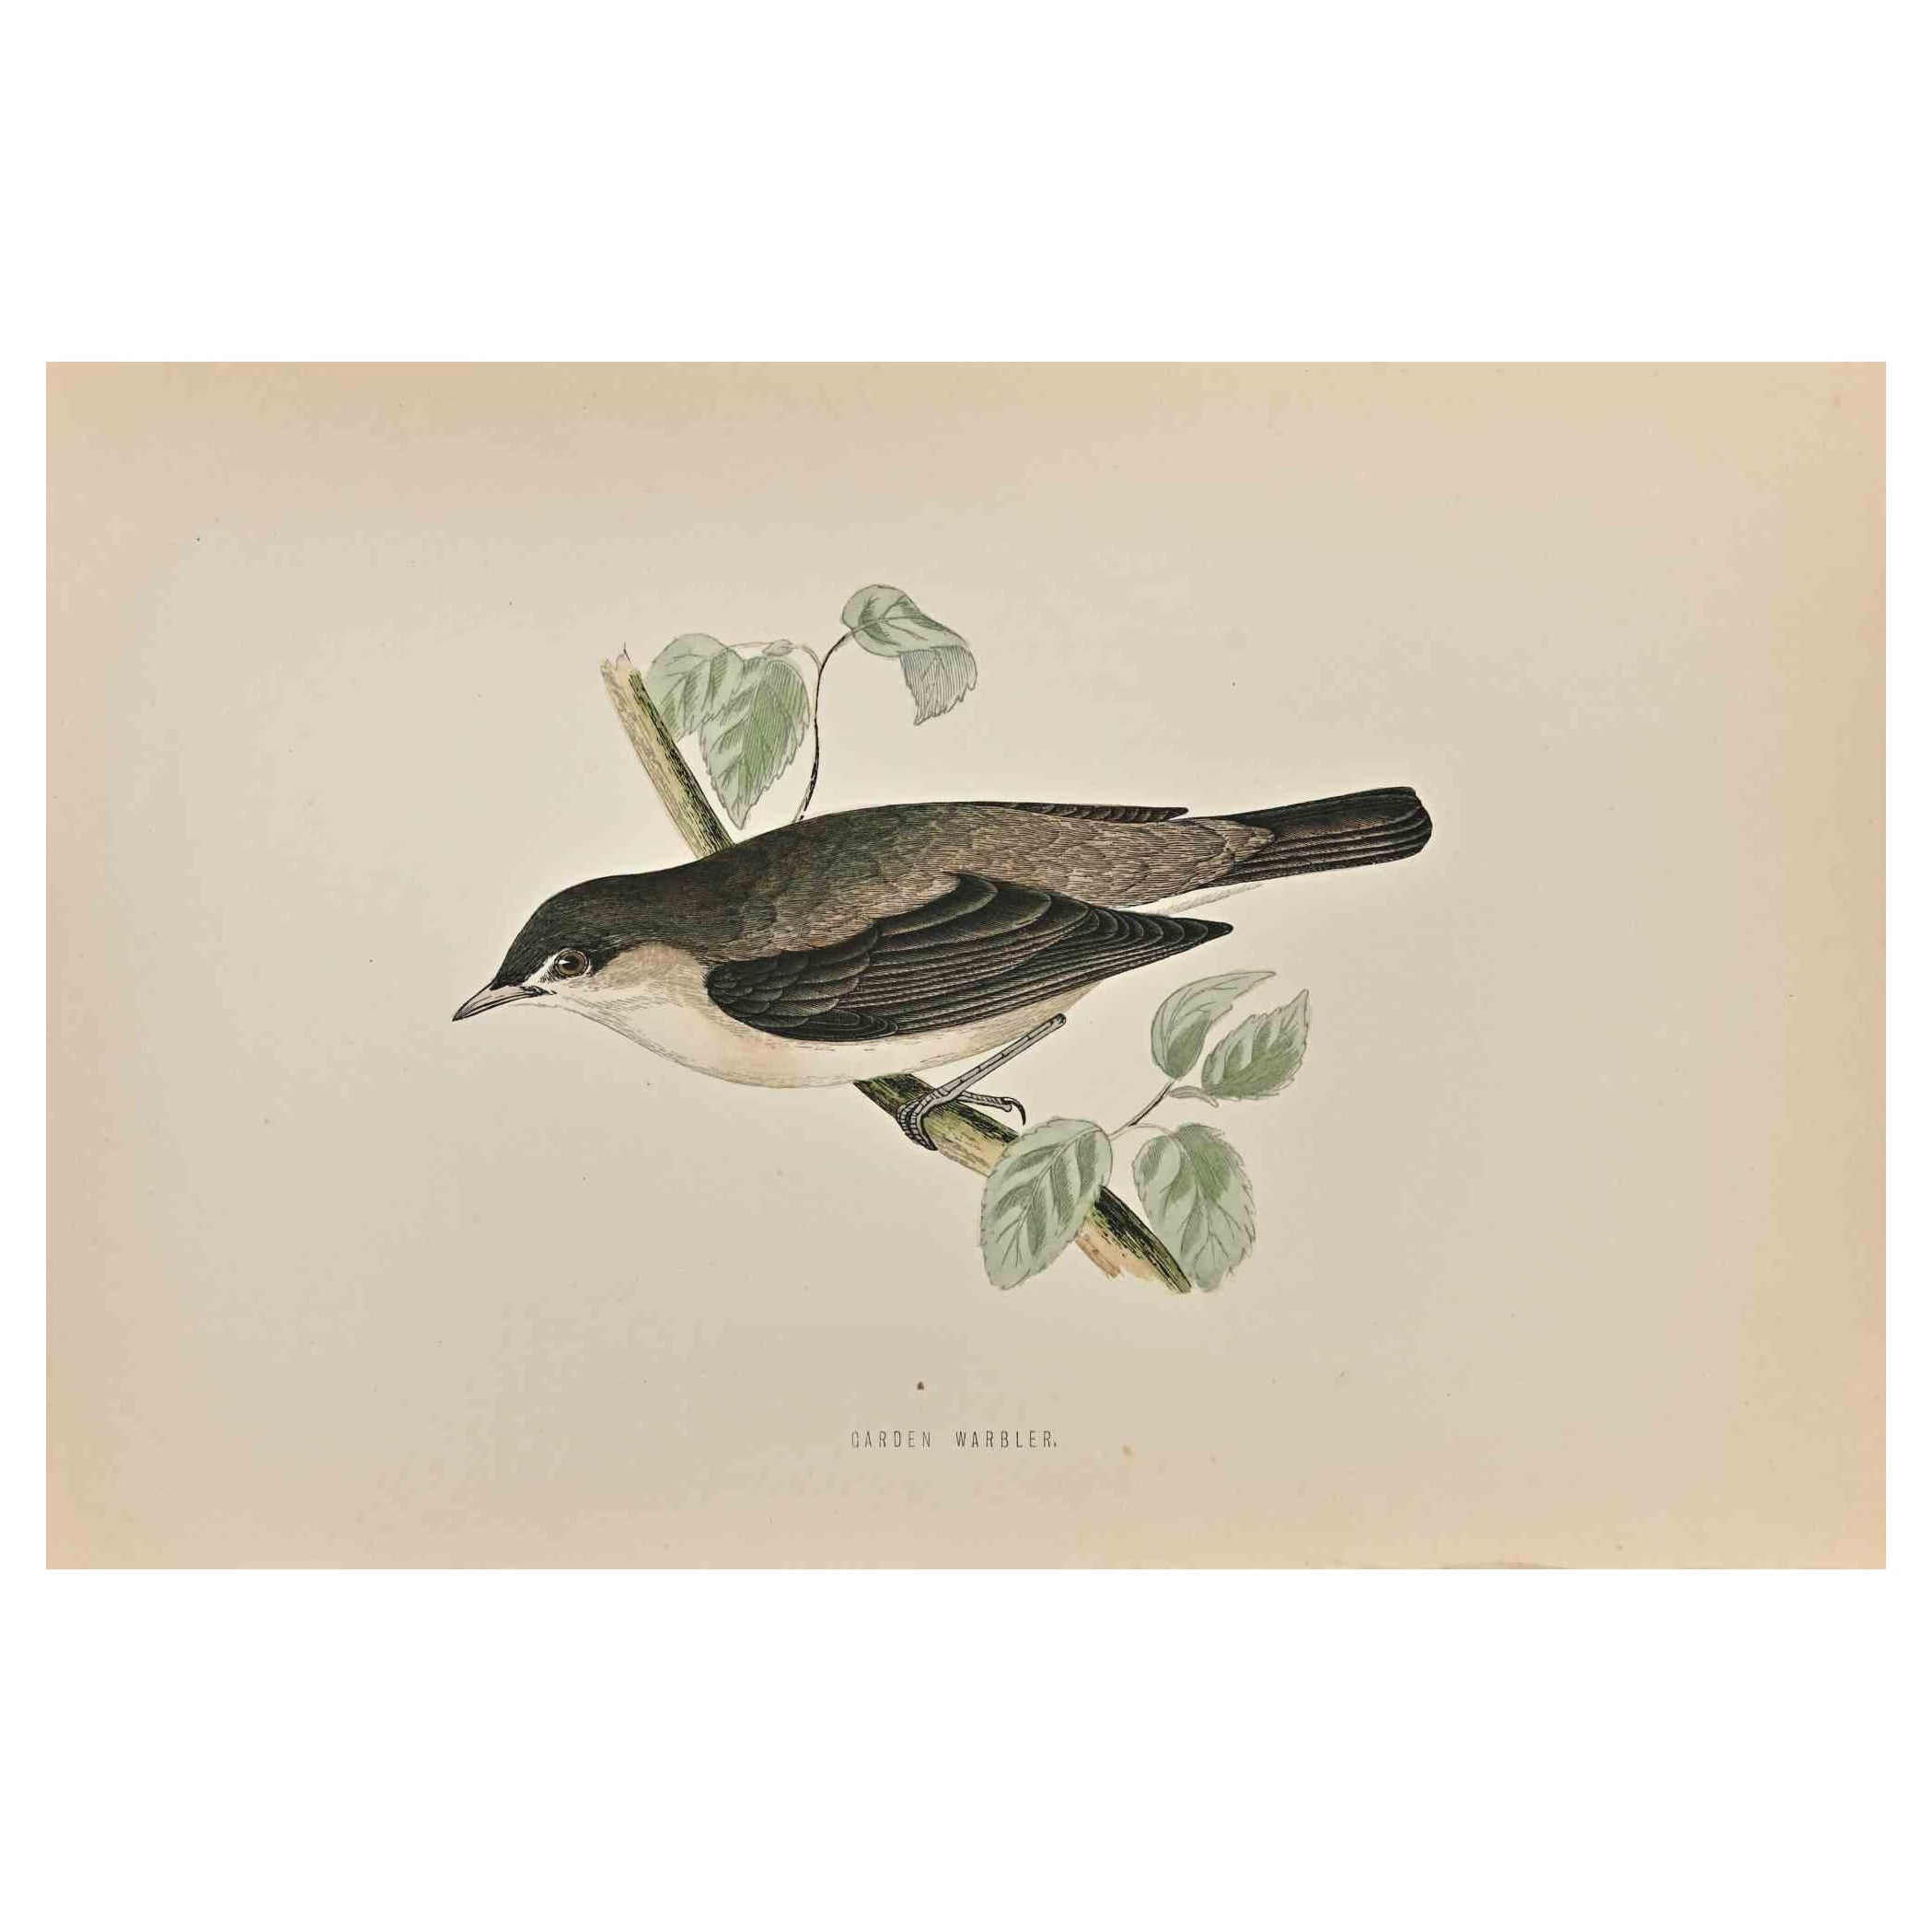 Garden Warbler is a modern artwork realized in 1870 by the British artist Alexander Francis Lydon (1836-1917) . 

Woodcut print, hand colored, published by London, Bell & Sons, 1870.  Name of the bird printed in plate. This work is part of a print